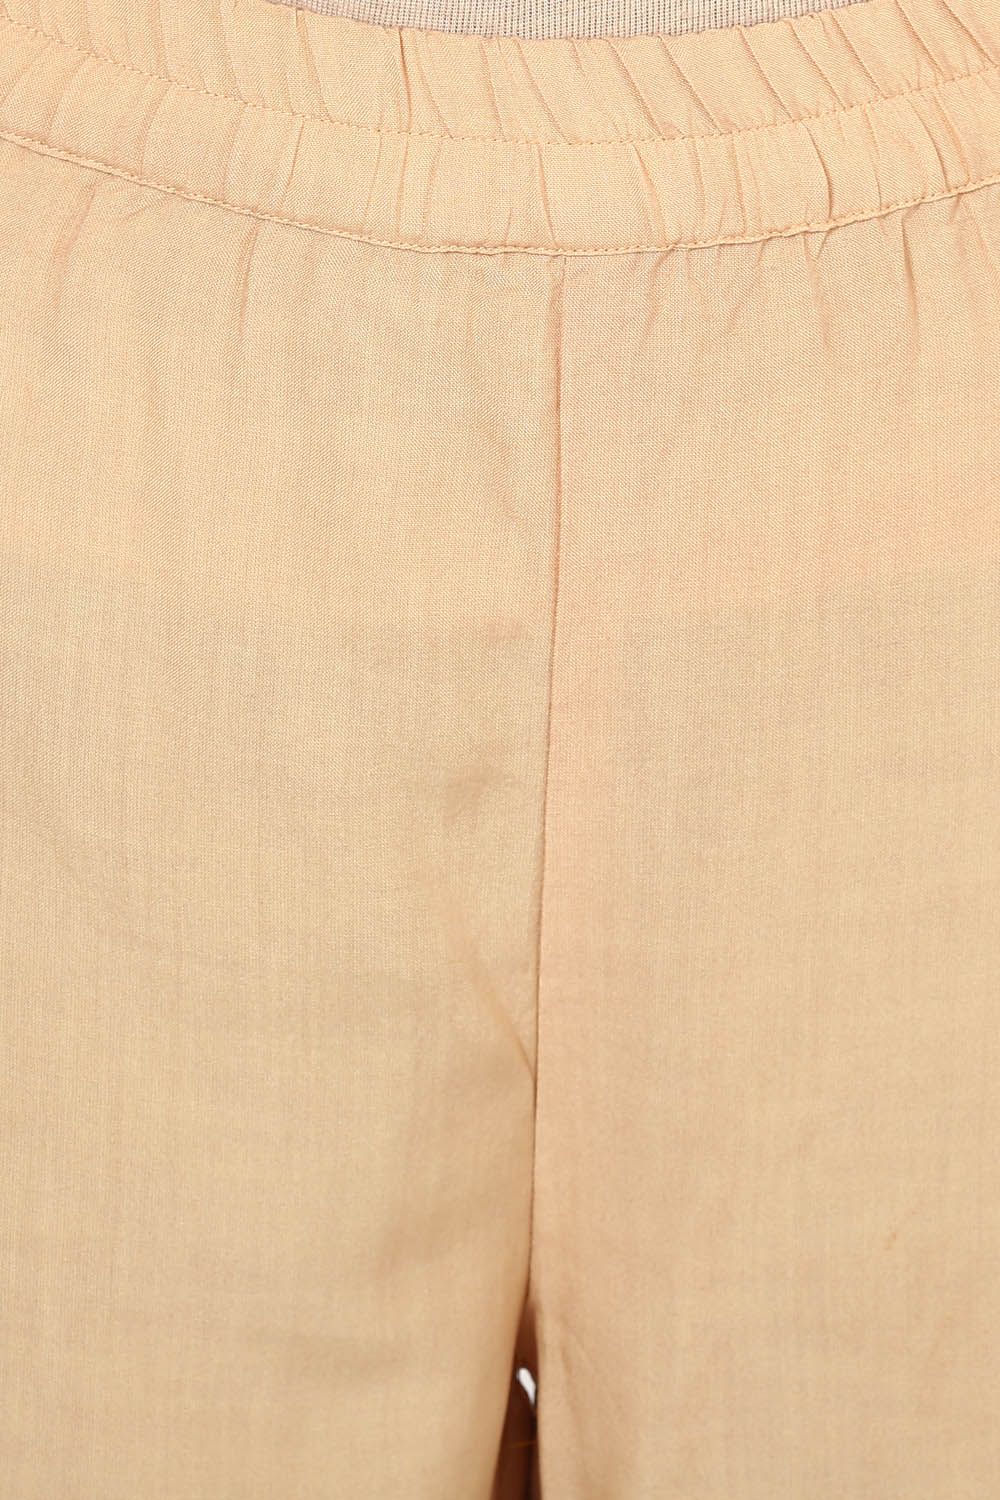 Beige Viscose Rayon Culottes image number 4